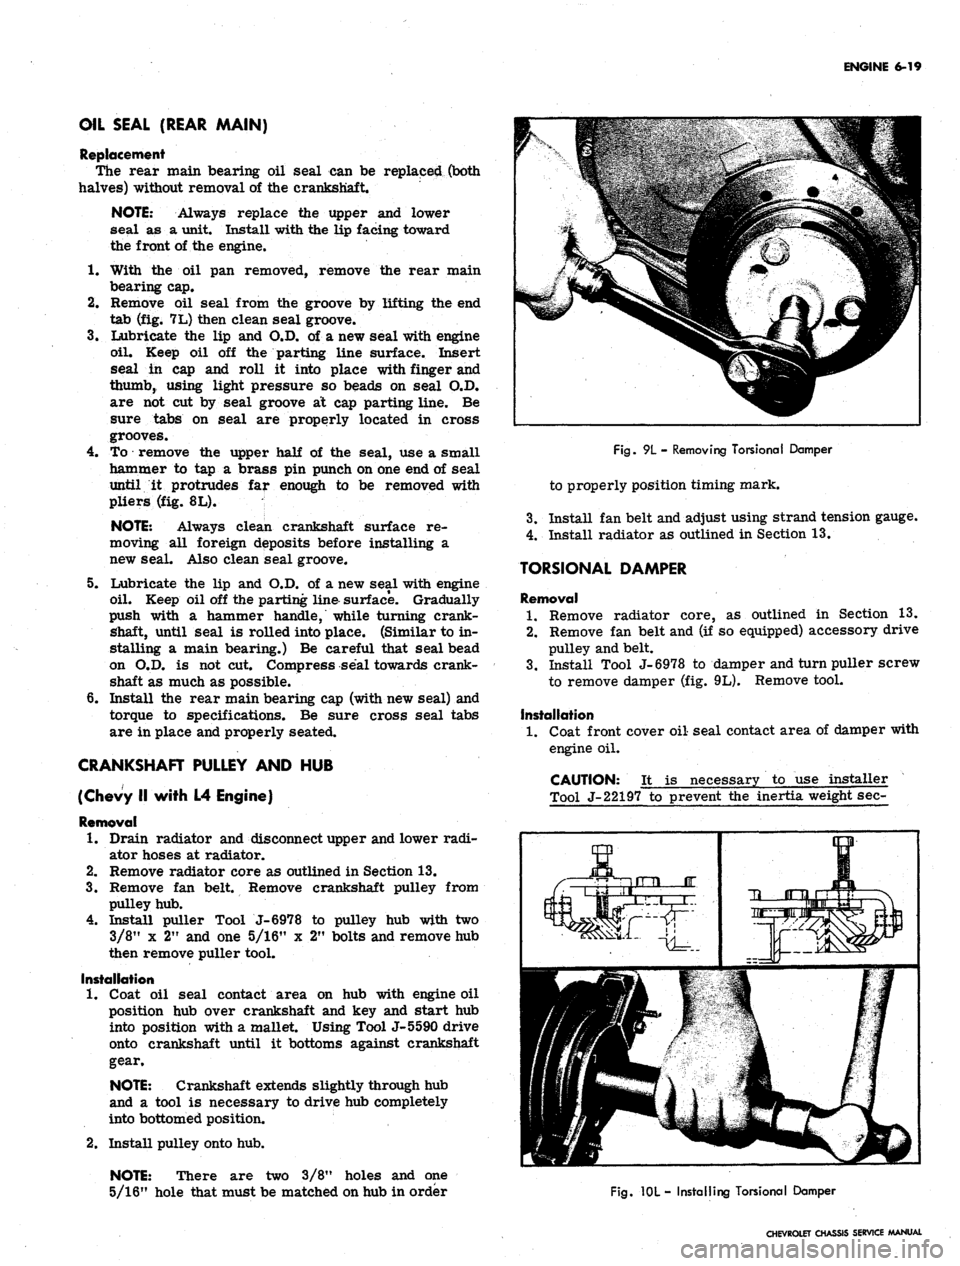 CHEVROLET CAMARO 1967 1.G Chassis Service Manual 
ENGINE 6-19

OIL SEAL (REAR MAIN)

Replacement

The rear main bearing oil seal can be replaced (both

halves) without removal of the crankshaft.

NOTE:
 Always replace the upper and lower

seal as a 